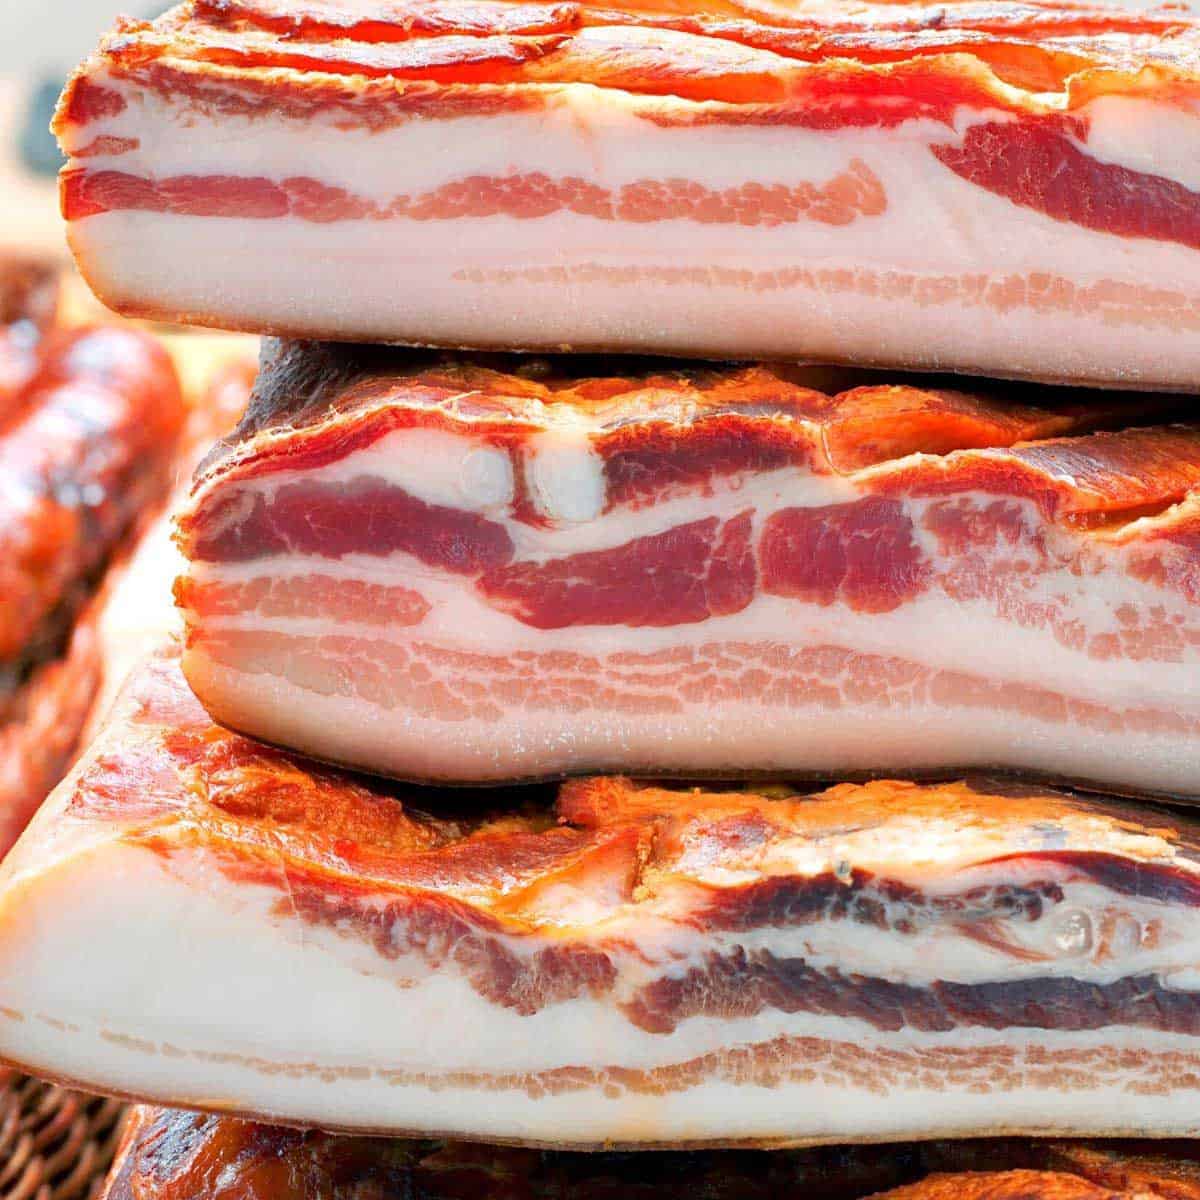 3 slabs of bacon stacked on top of one another, with the lower slab being darker in color than the others.